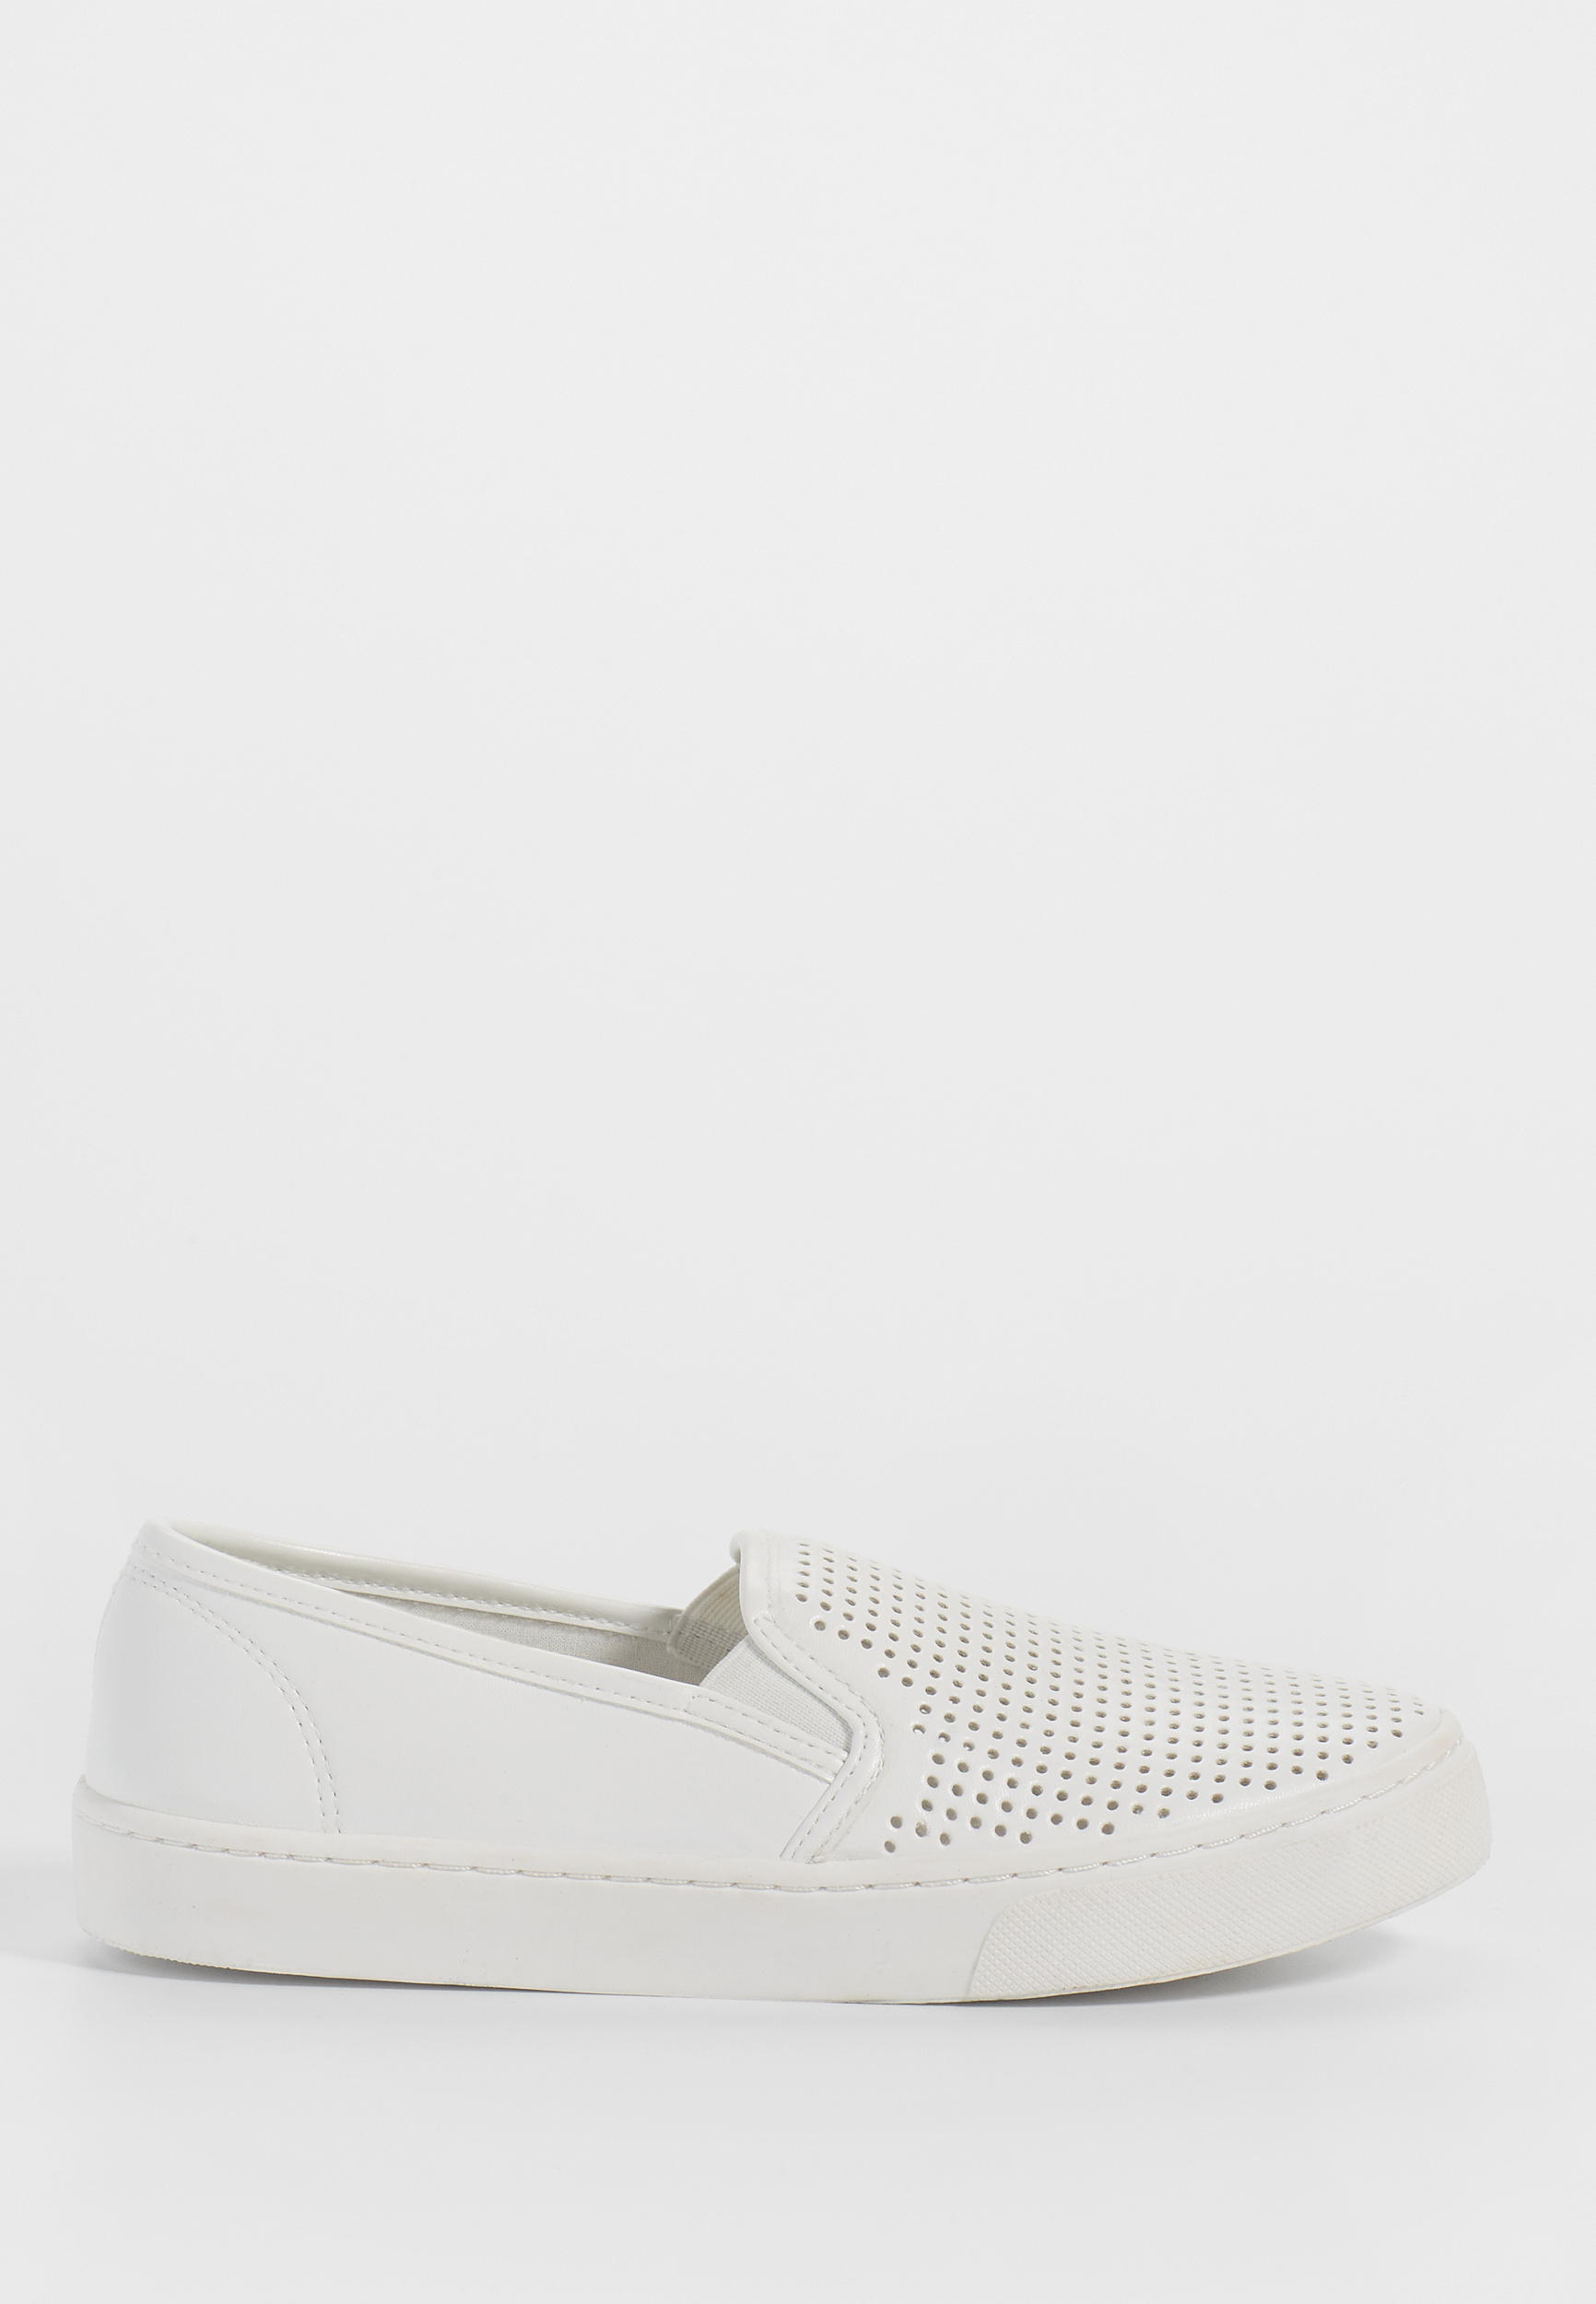 Piper perforated faux leather slip on | maurices